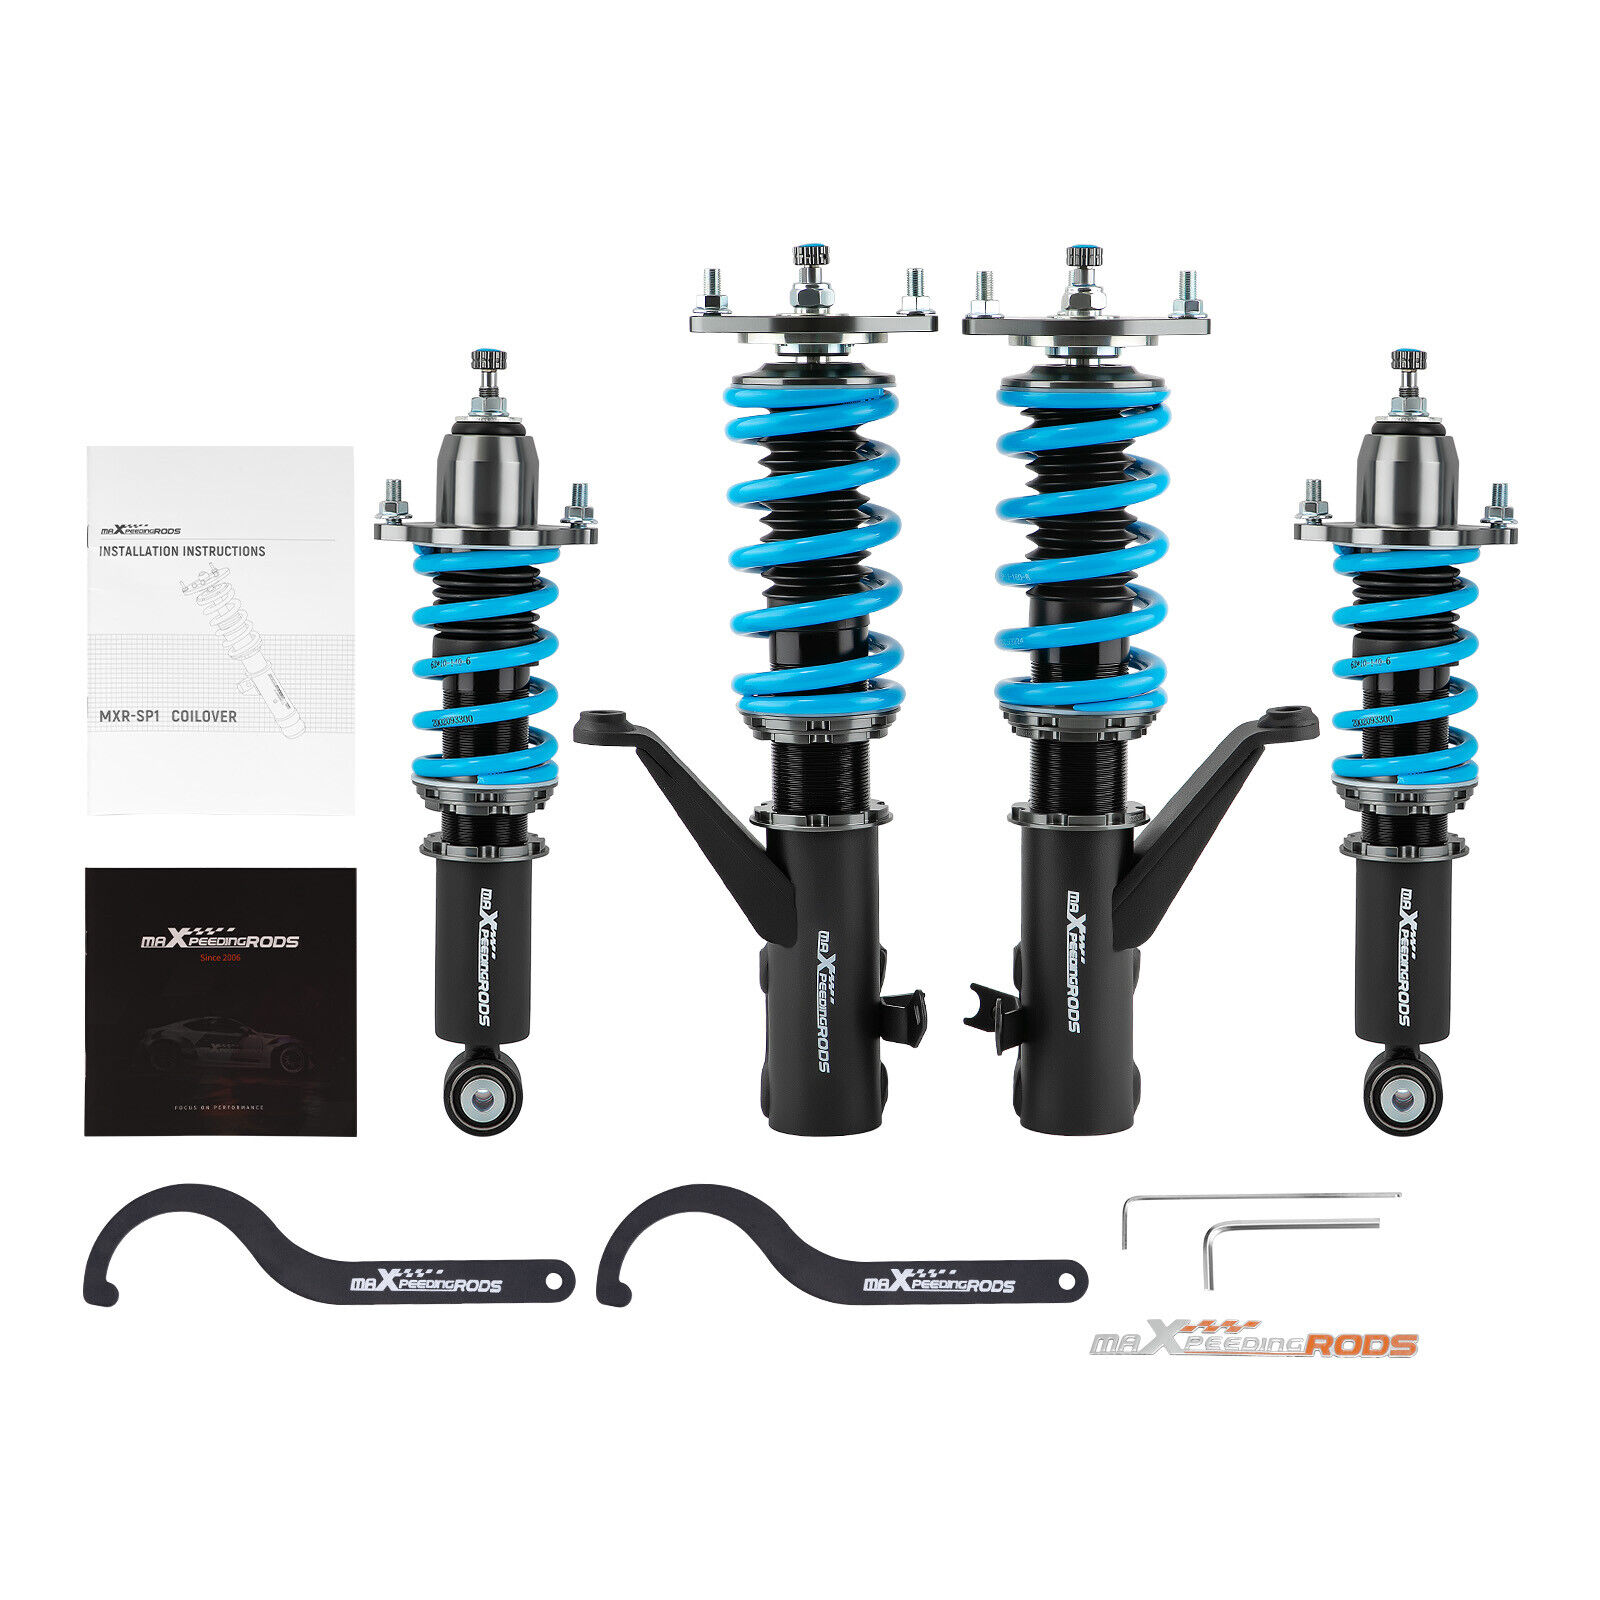 MaXpeedingrods 24 Way Suspension Coilovers Lowering Kit For Acura RSX 02-06